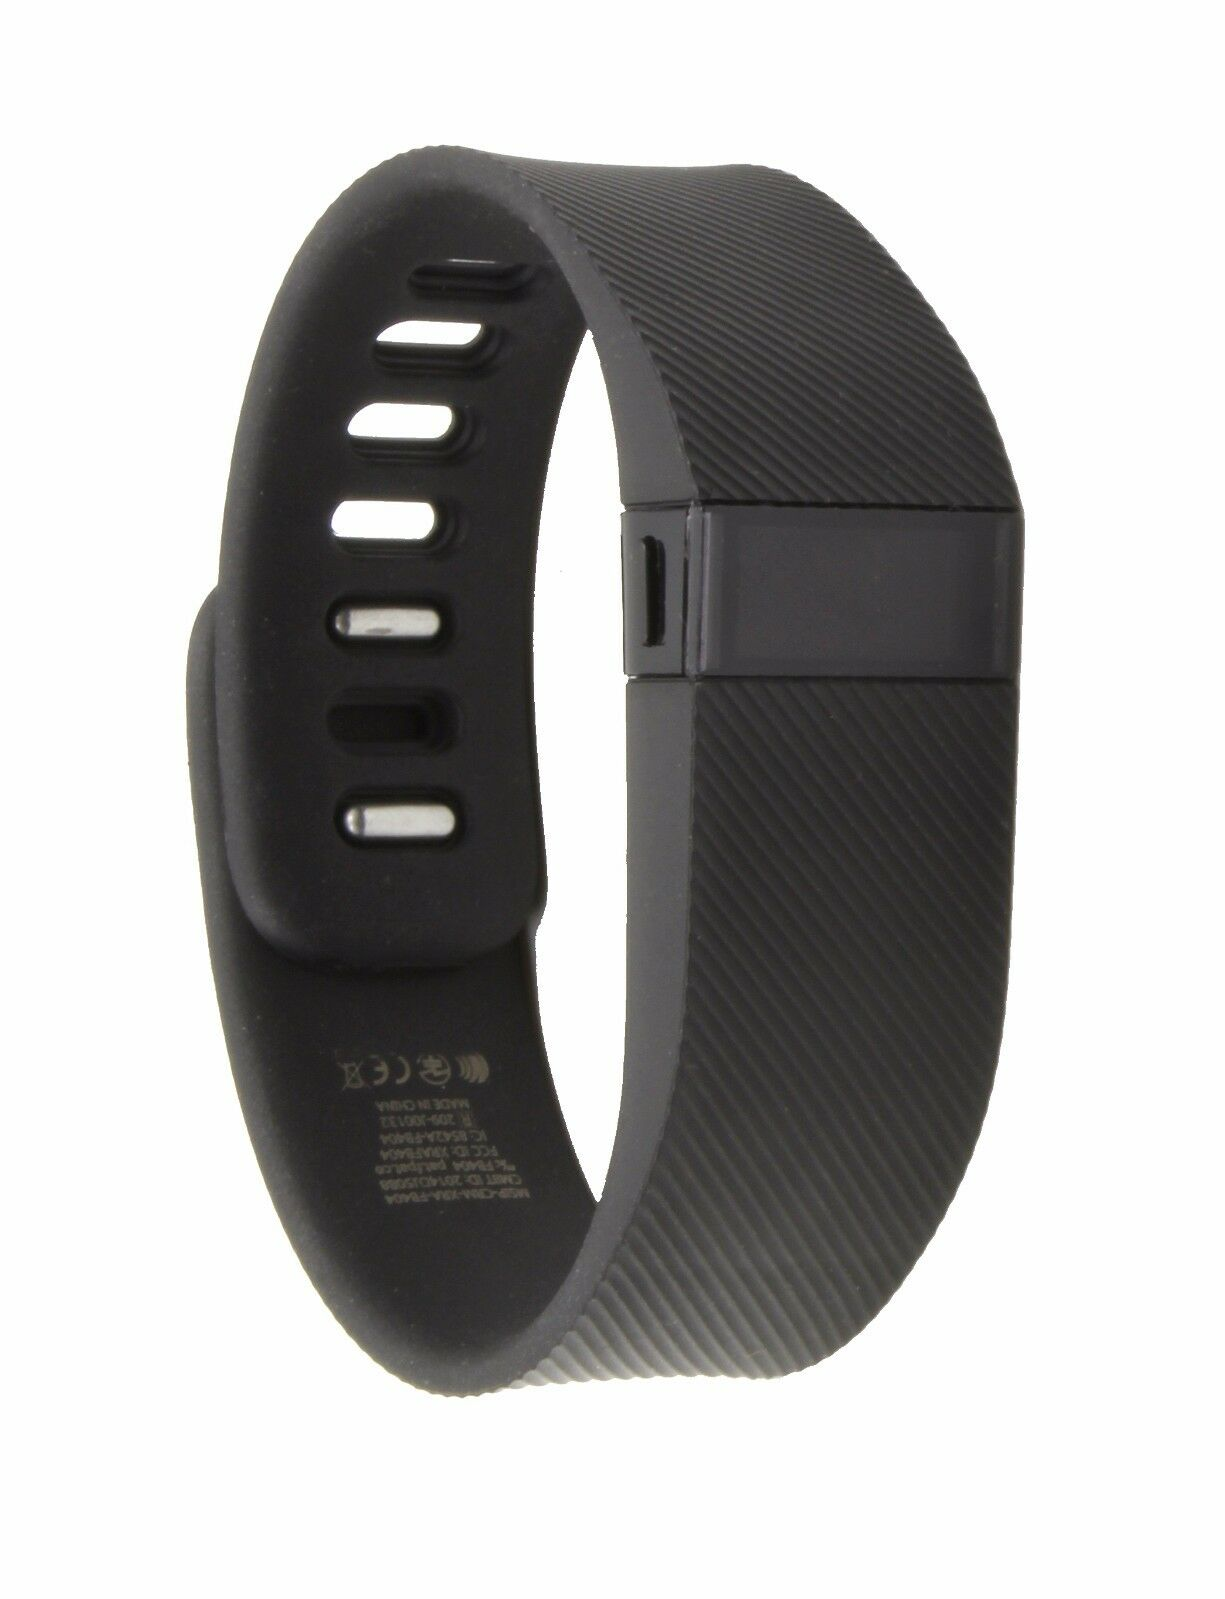 Fitness Trackers | Fitness Bands - Kmart